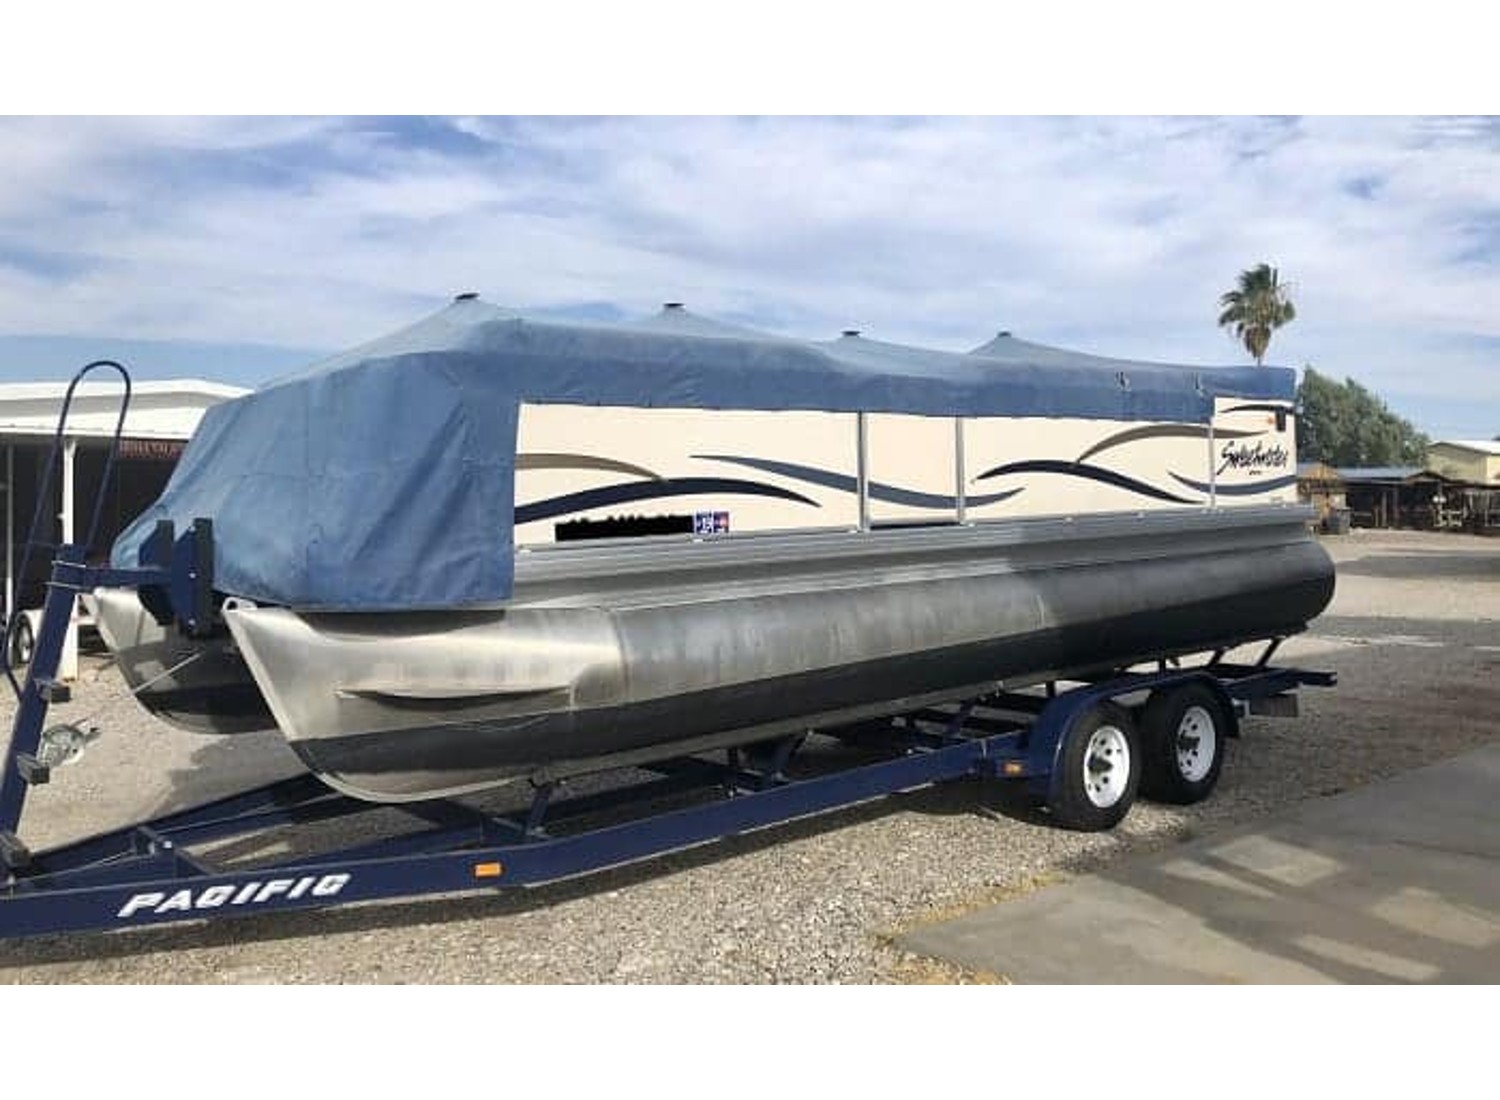 Great Pontoon Boat Covers in 2023 - Sail Top Reviews | Review by SAIL